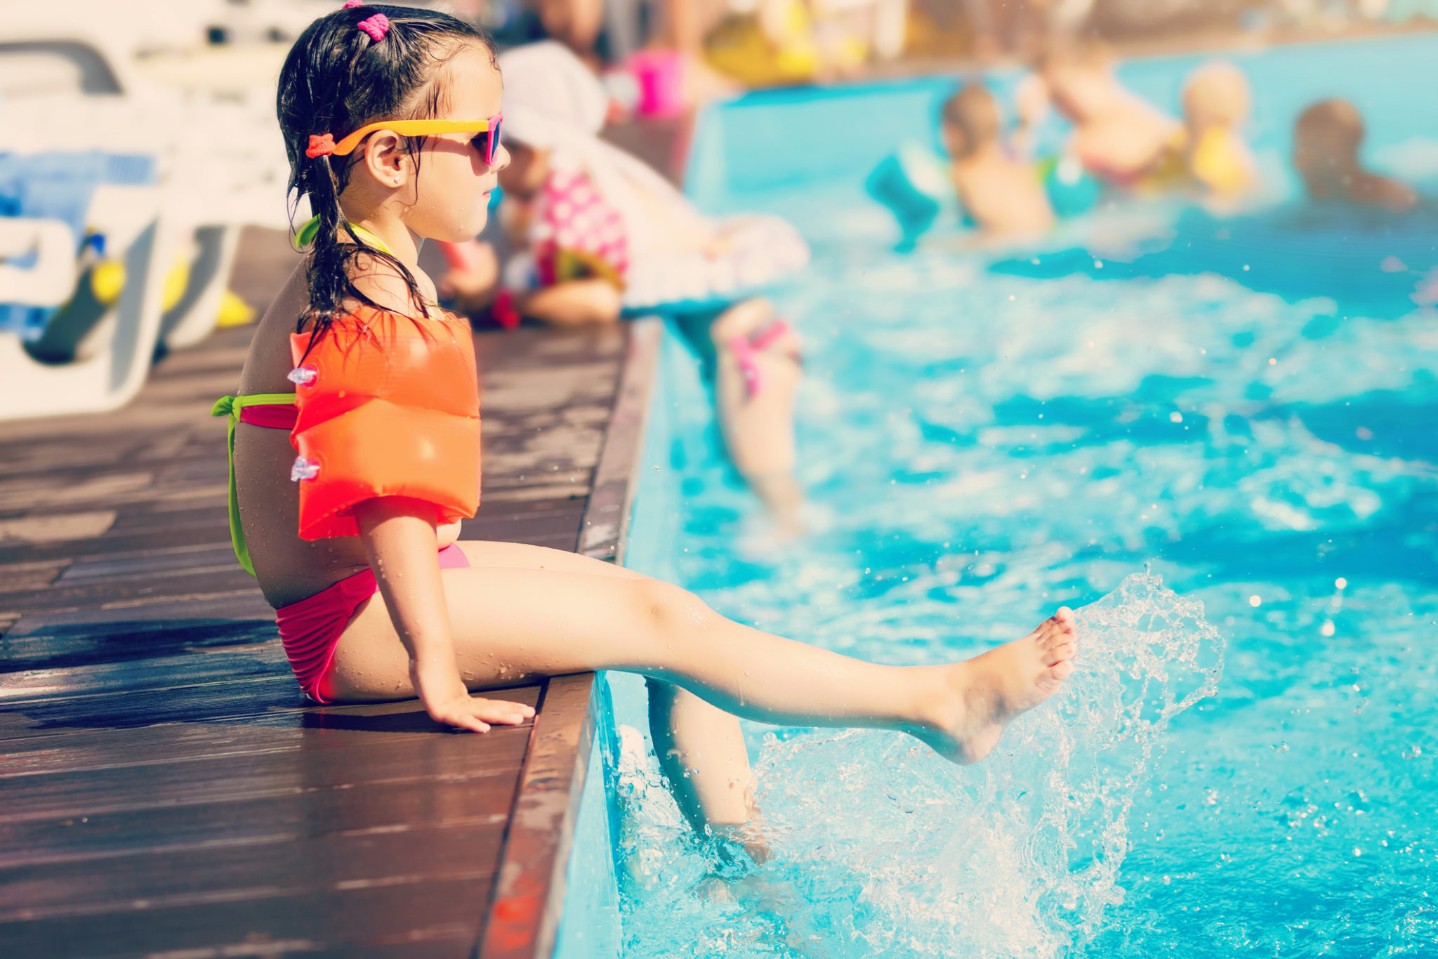 Little girl playing in outdoor swimming pool jumping into water on summer vacation on tropical beach island. Child learning to swim in outdoor pool of luxury resort.